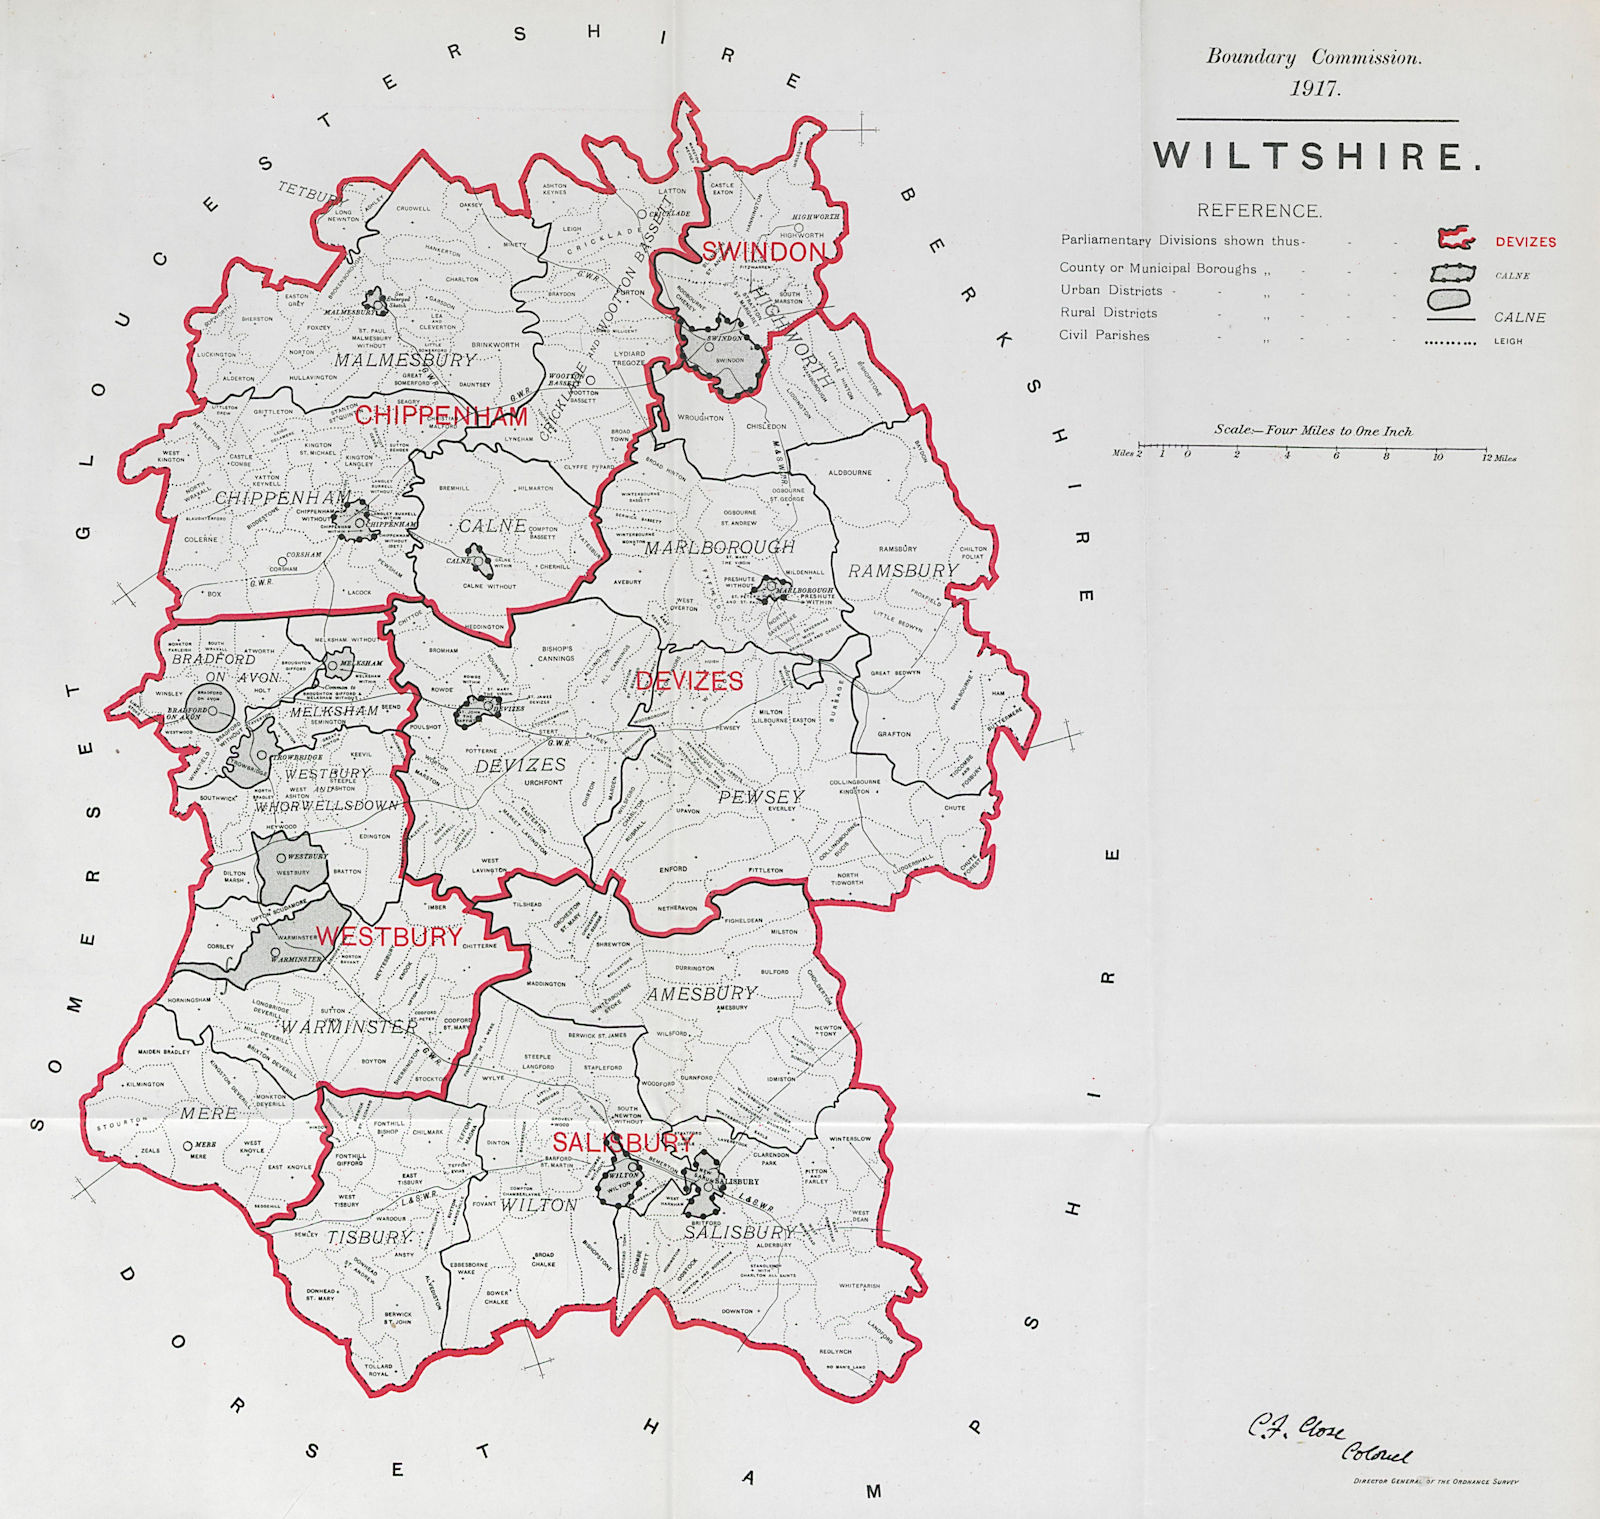 Wiltshire Parliamentary County. BOUNDARY COMMISSION. Close 1917 old map